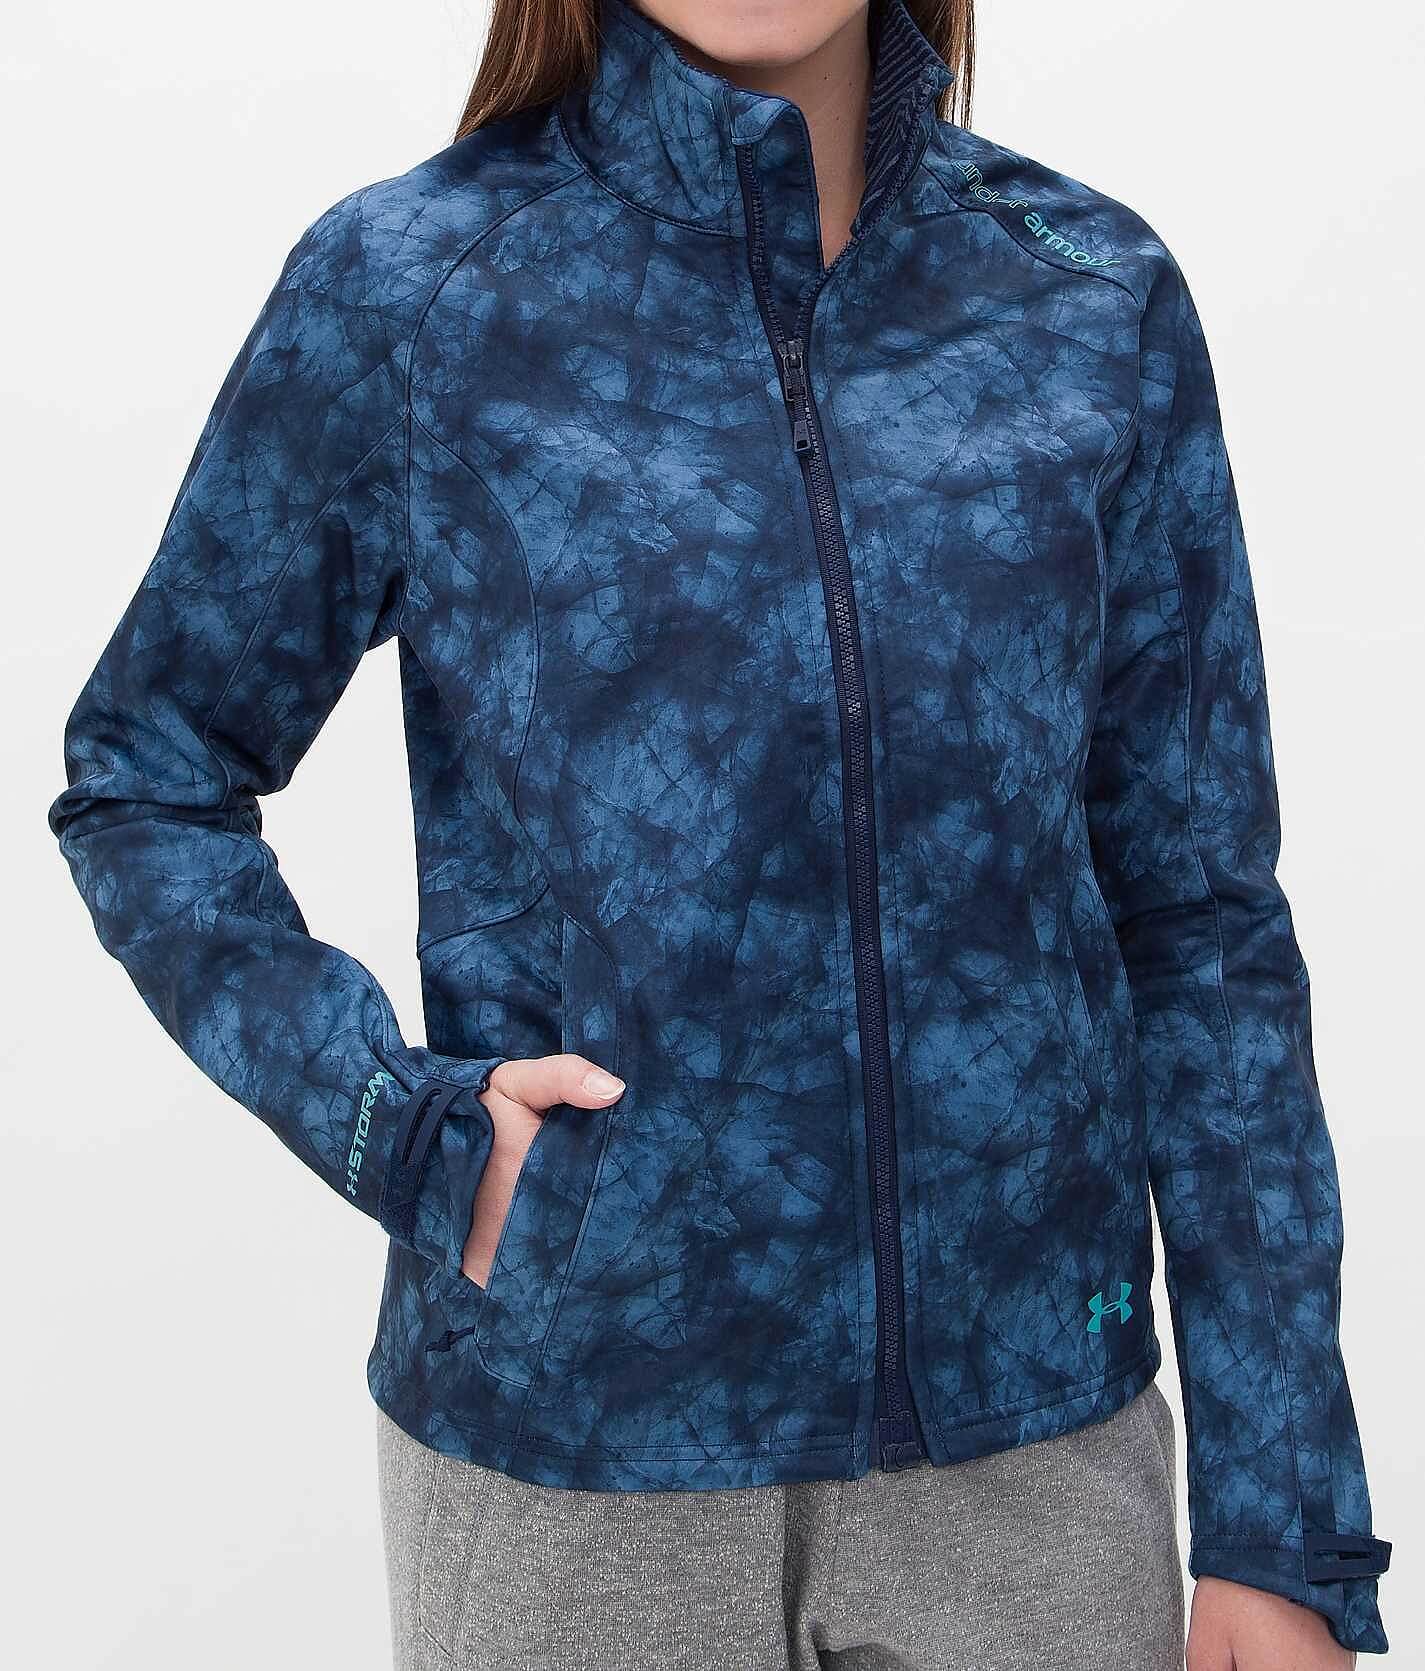 womens under armour softshell jacket